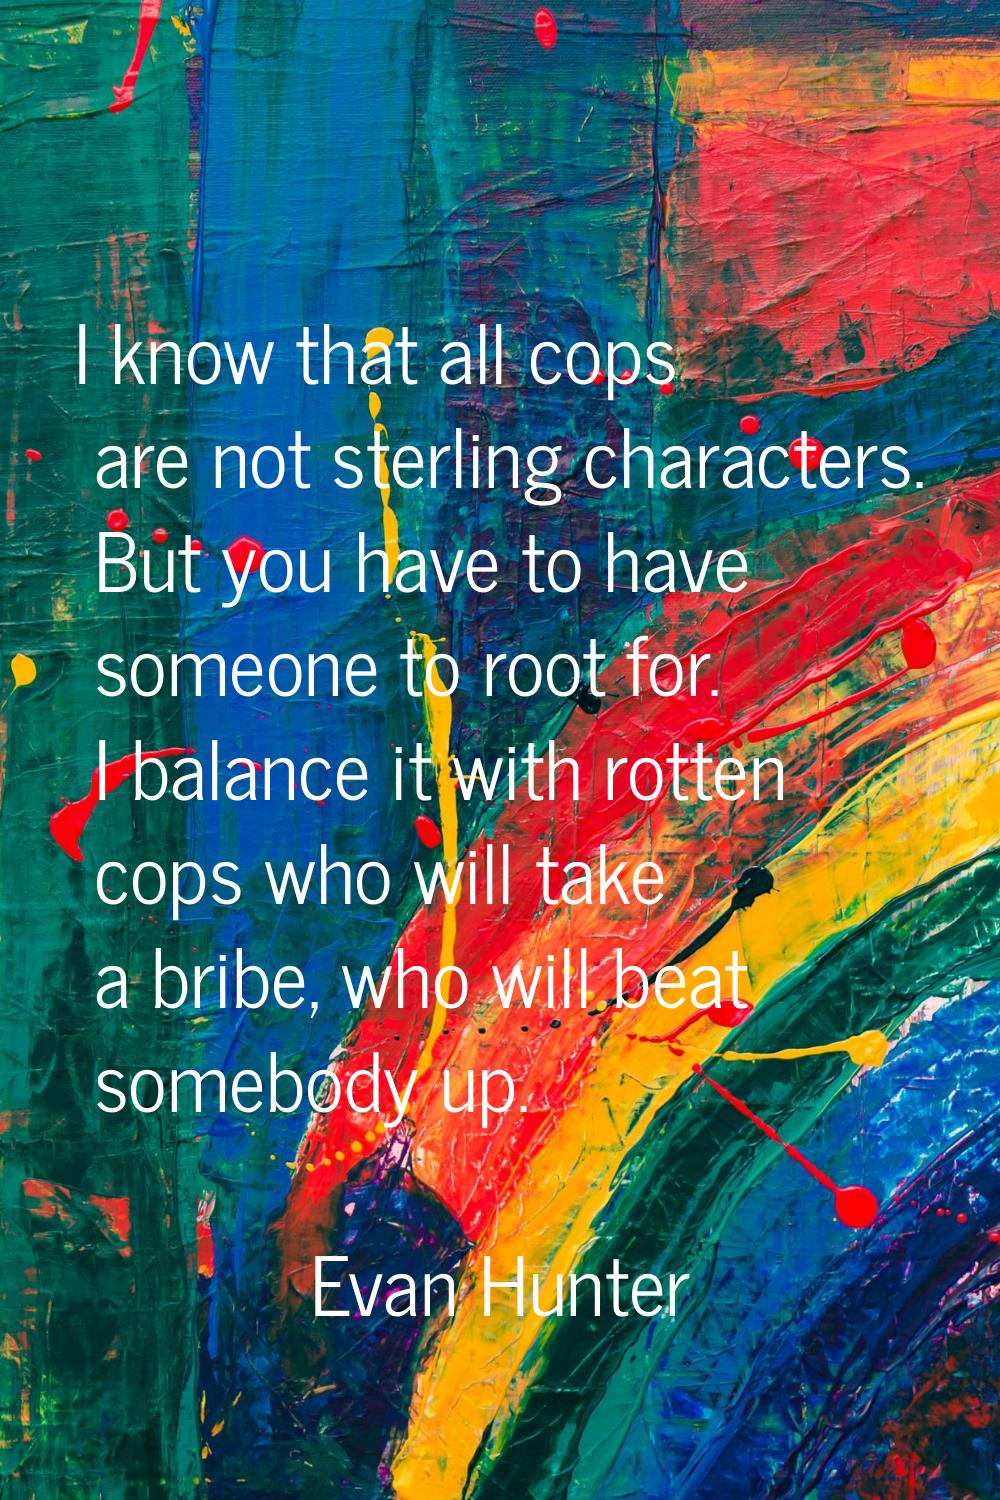 I know that all cops are not sterling characters. But you have to have someone to root for. I balan